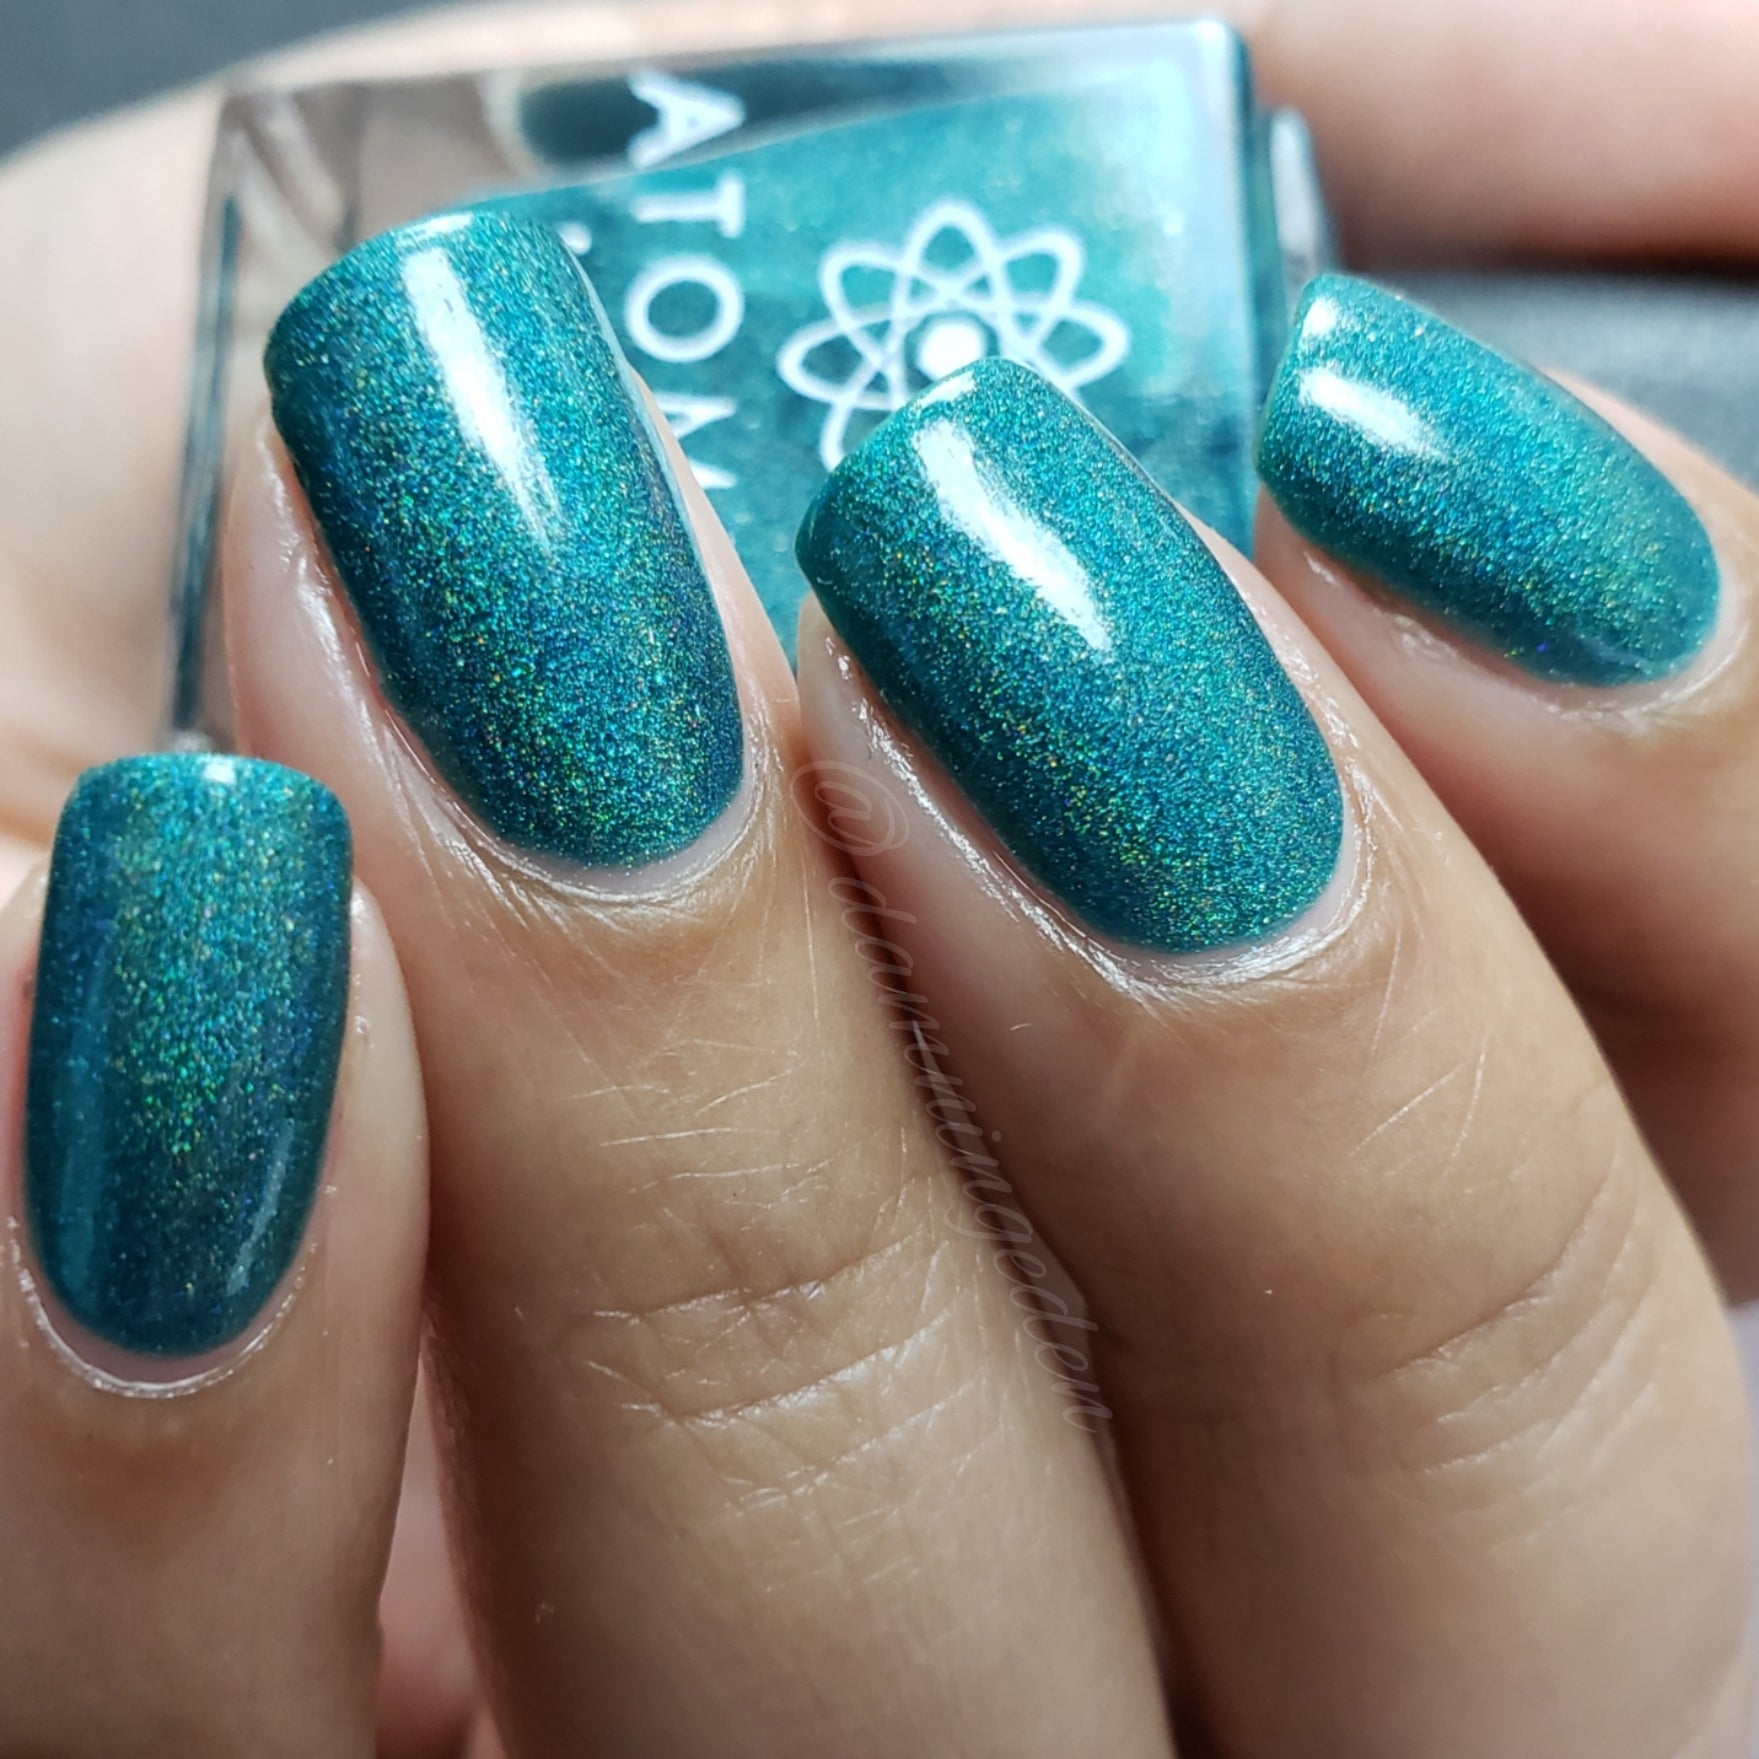 Spill the Teal from the “Tonally Awesome